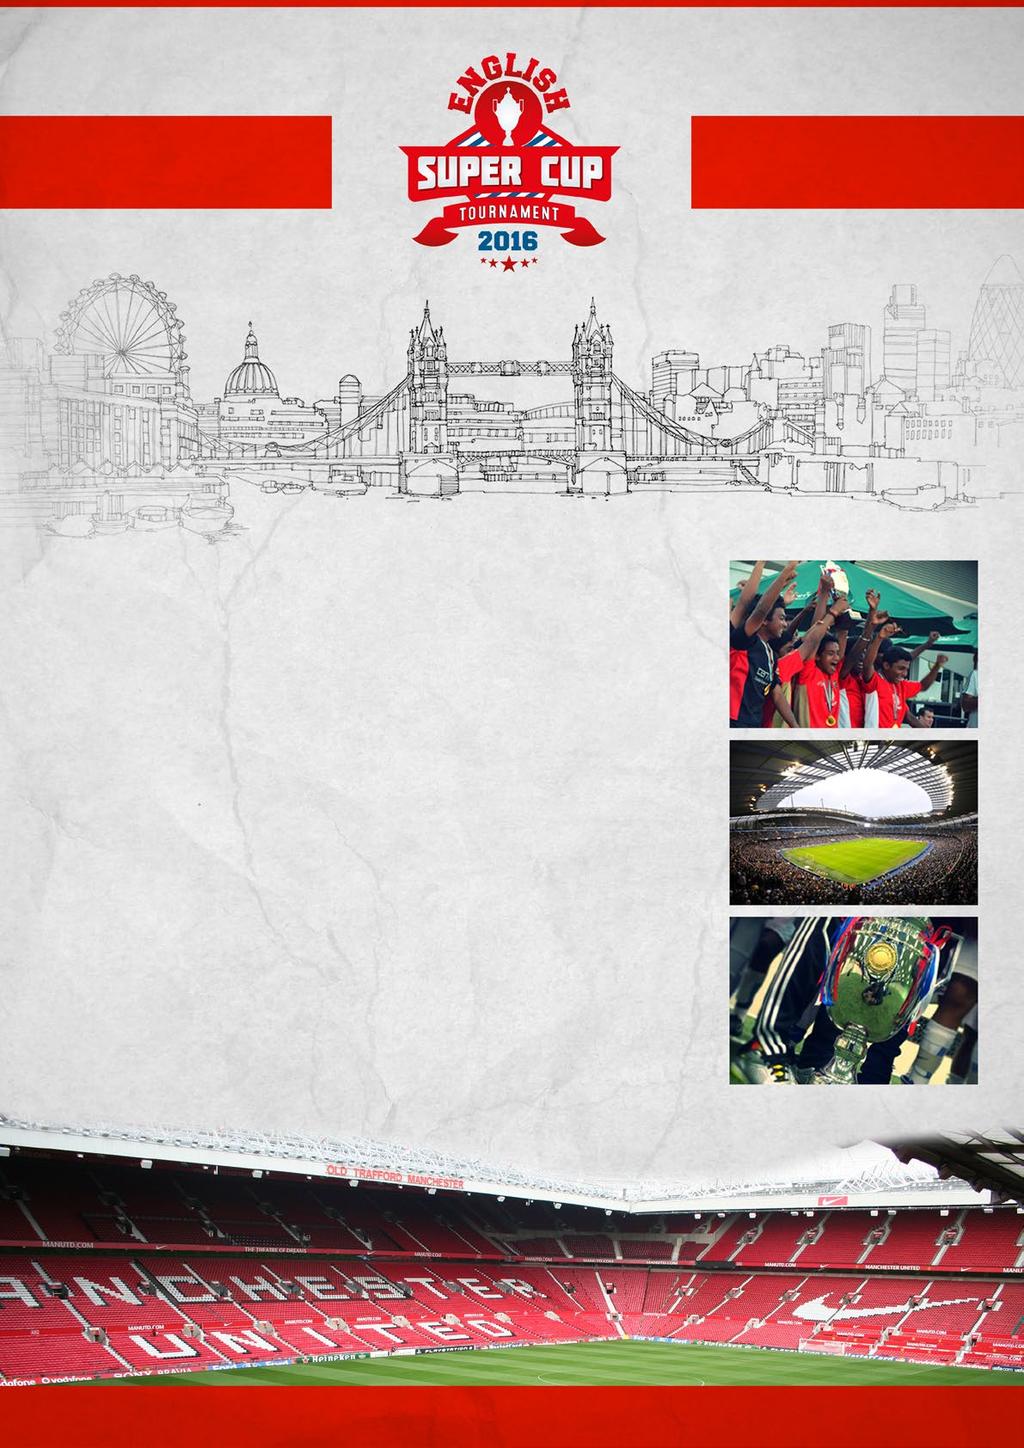 26 th July - 1 st august, 2016 tour ITINERARY, 2016 TOUR OVERVIEW Englands s leading international football tournament played in the heart of the world renowned home of football, Manchester, England.